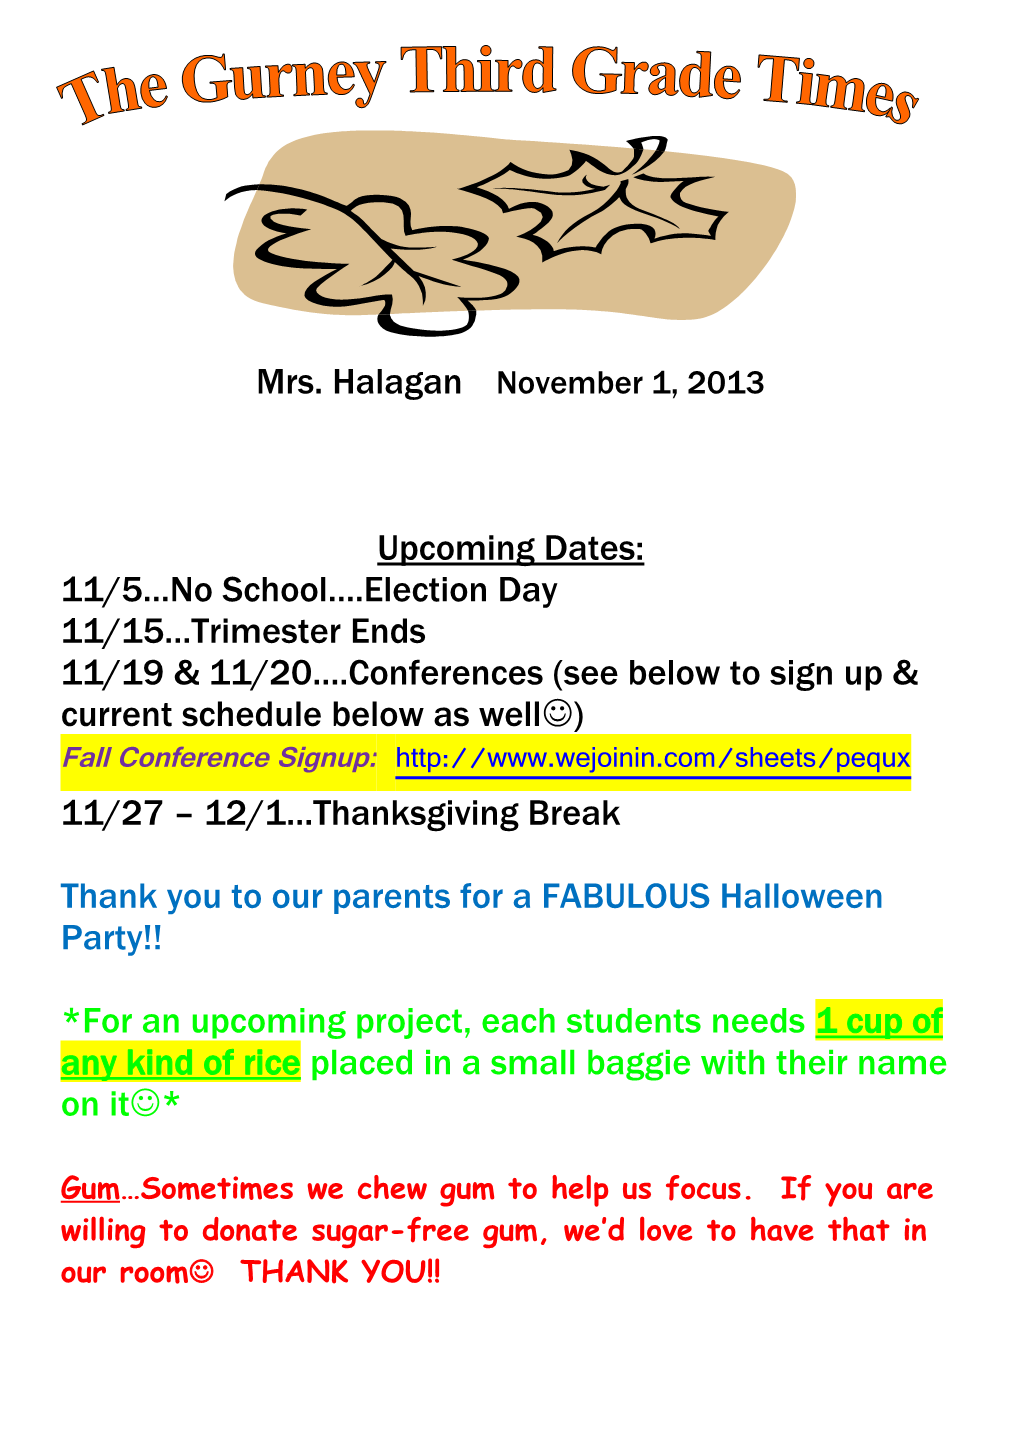 11/19 & 11/20 .Conferences (See Below to Sign up & Current Schedule Below As Wellj)